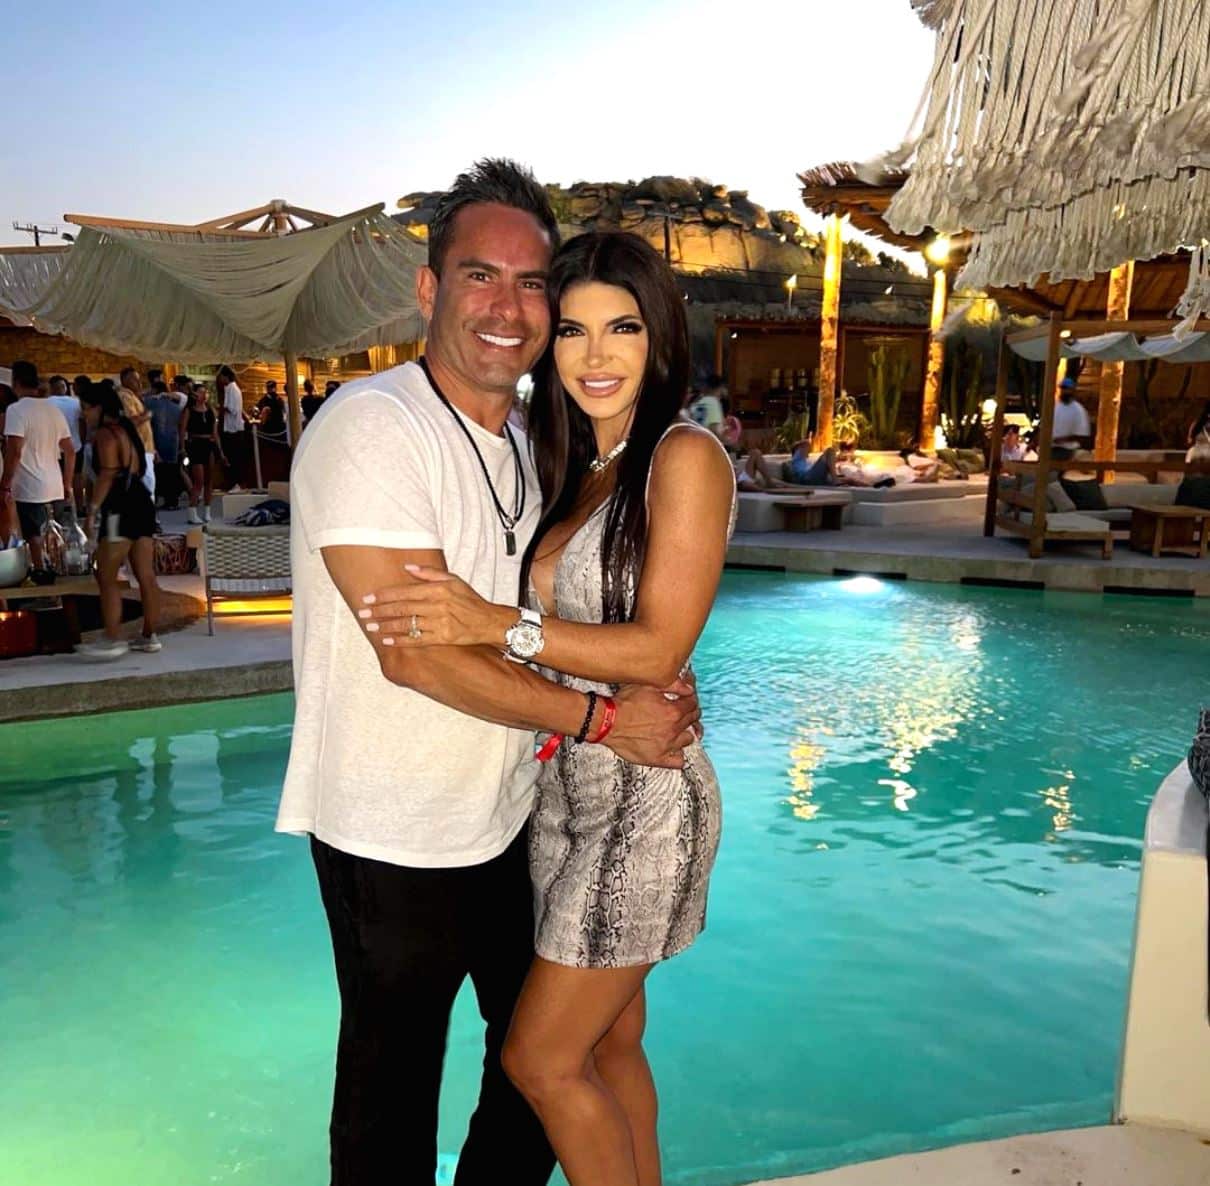 Teresa Giudice Discusses Divorce Rumors, Says She Appreciates that People are Invested, Plus Check Out the Recent Bikini Pictures the RHONJ Star Shared